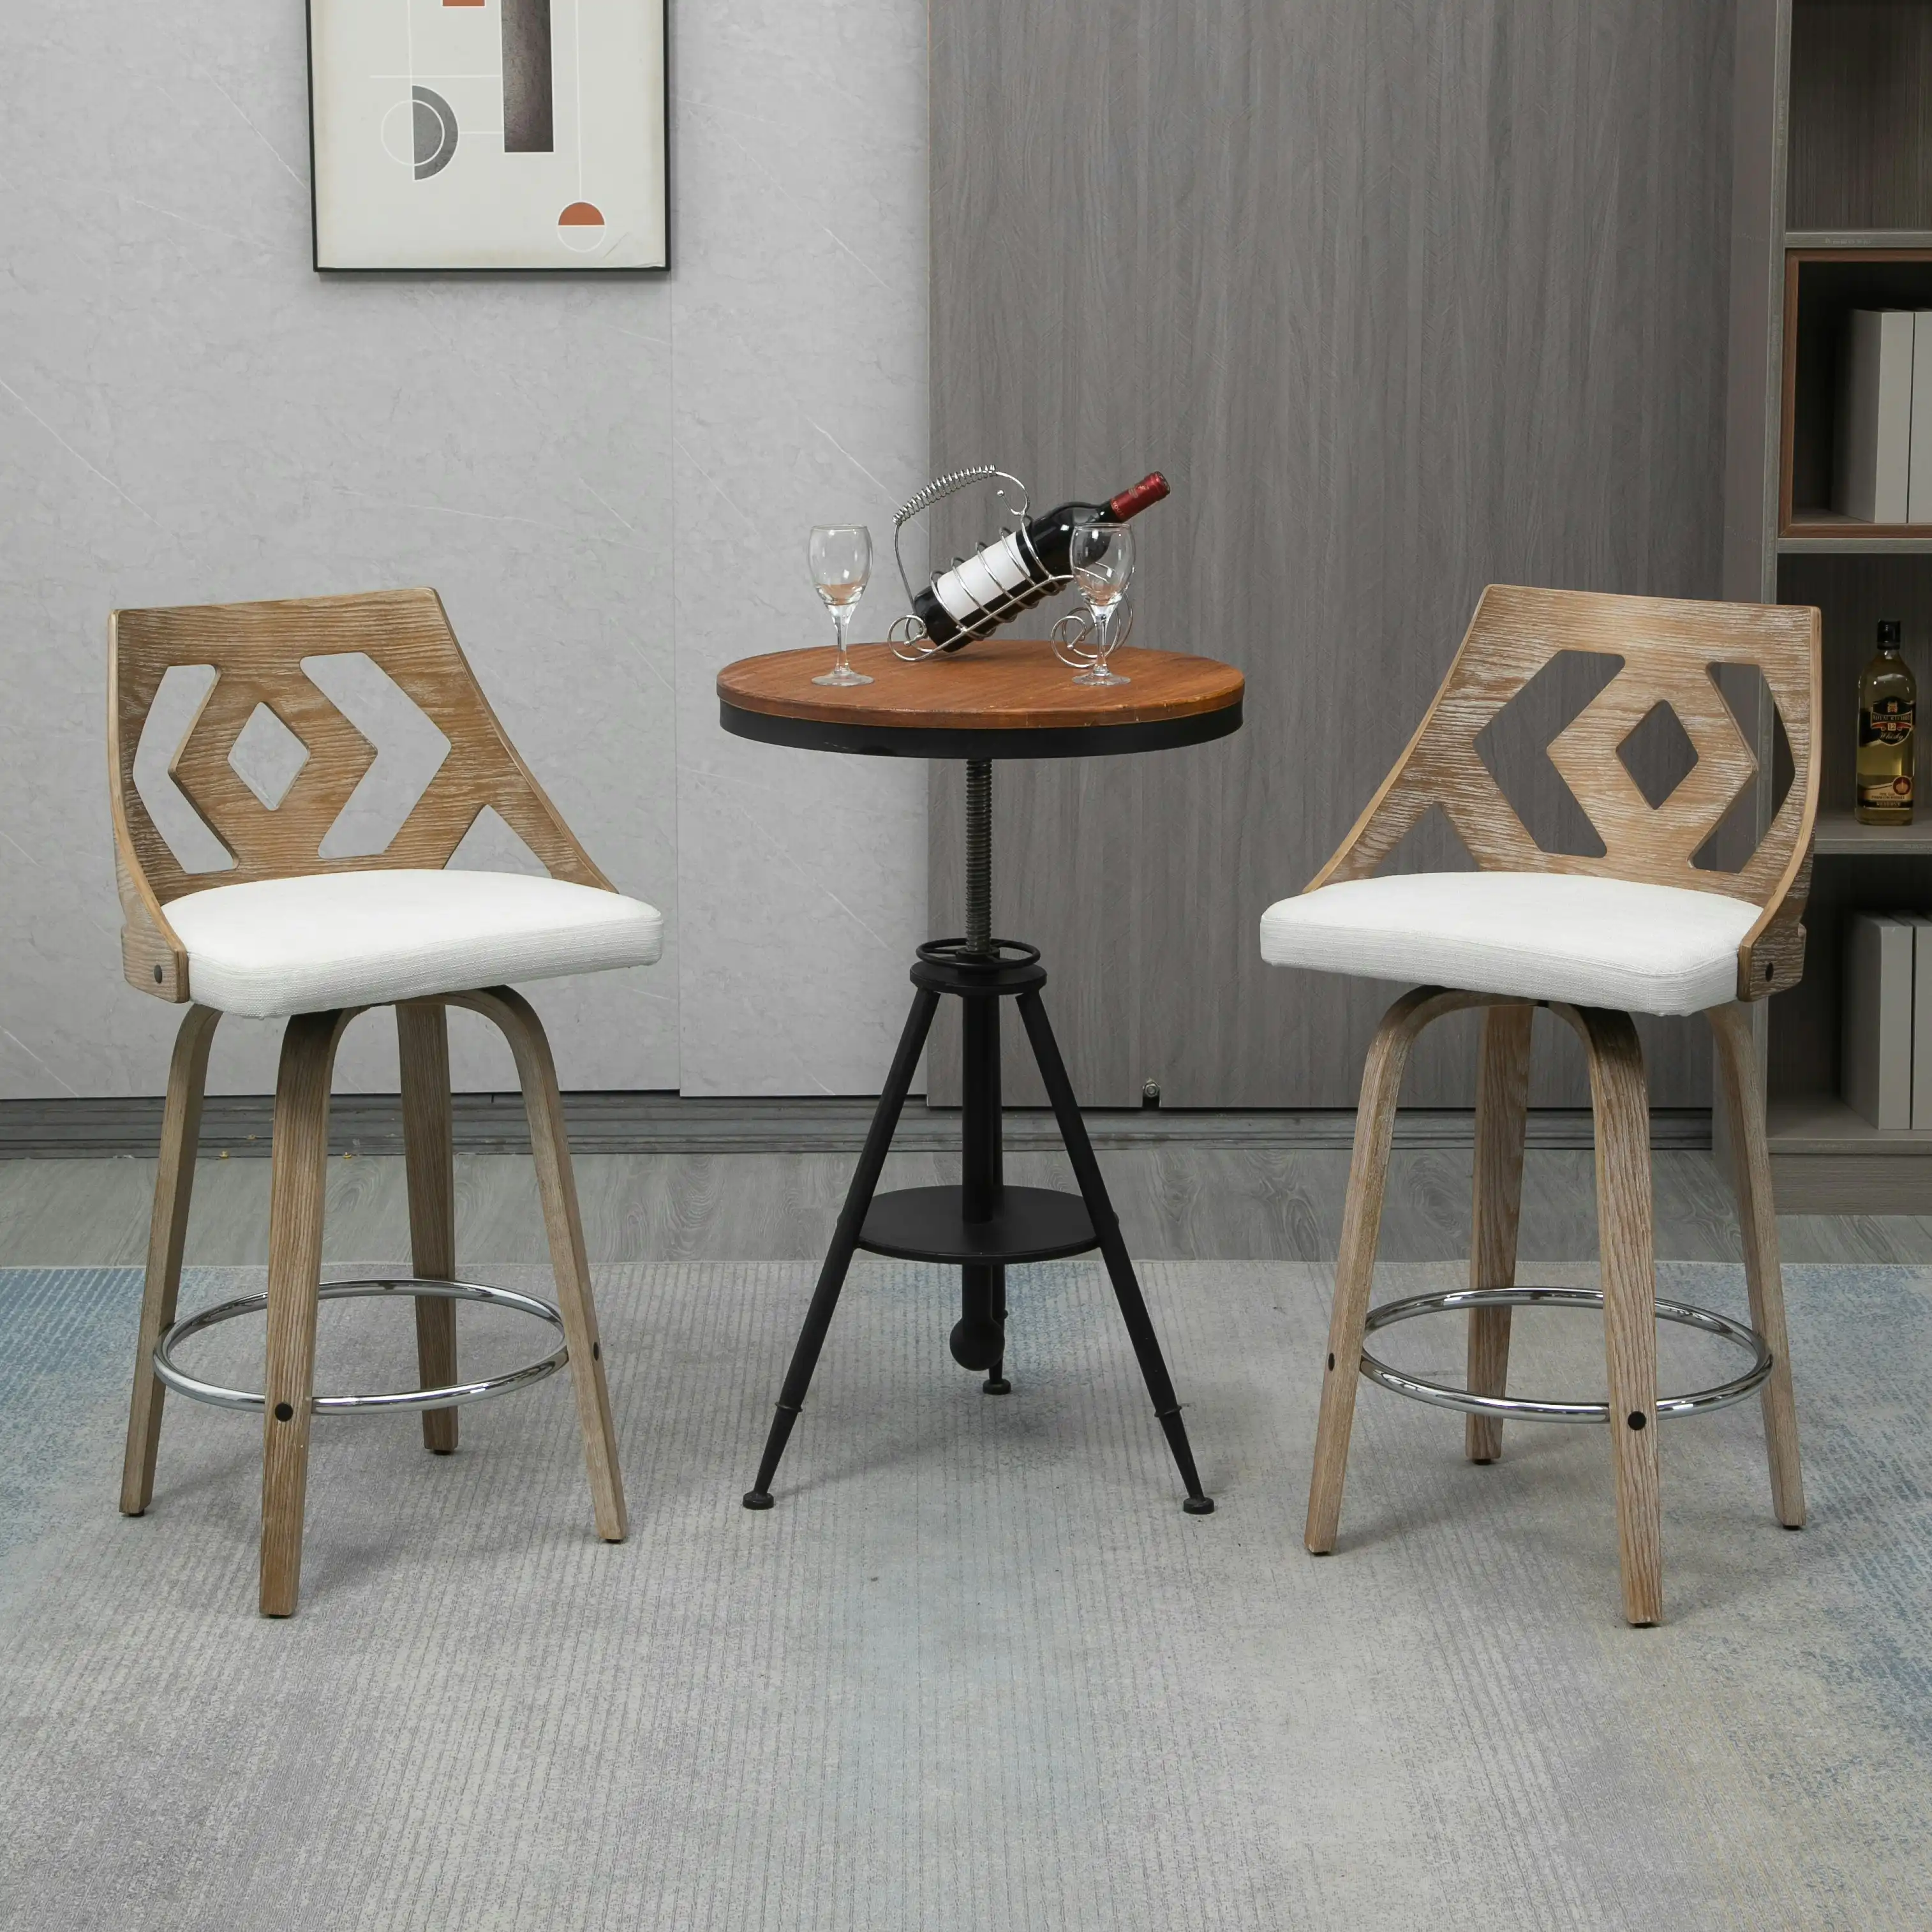 IHOMDEC Swivel Bar Stool with Cut Out Back in Beige Fabric Upholstery and White Brushed Oak Wood, 2pcs/Set